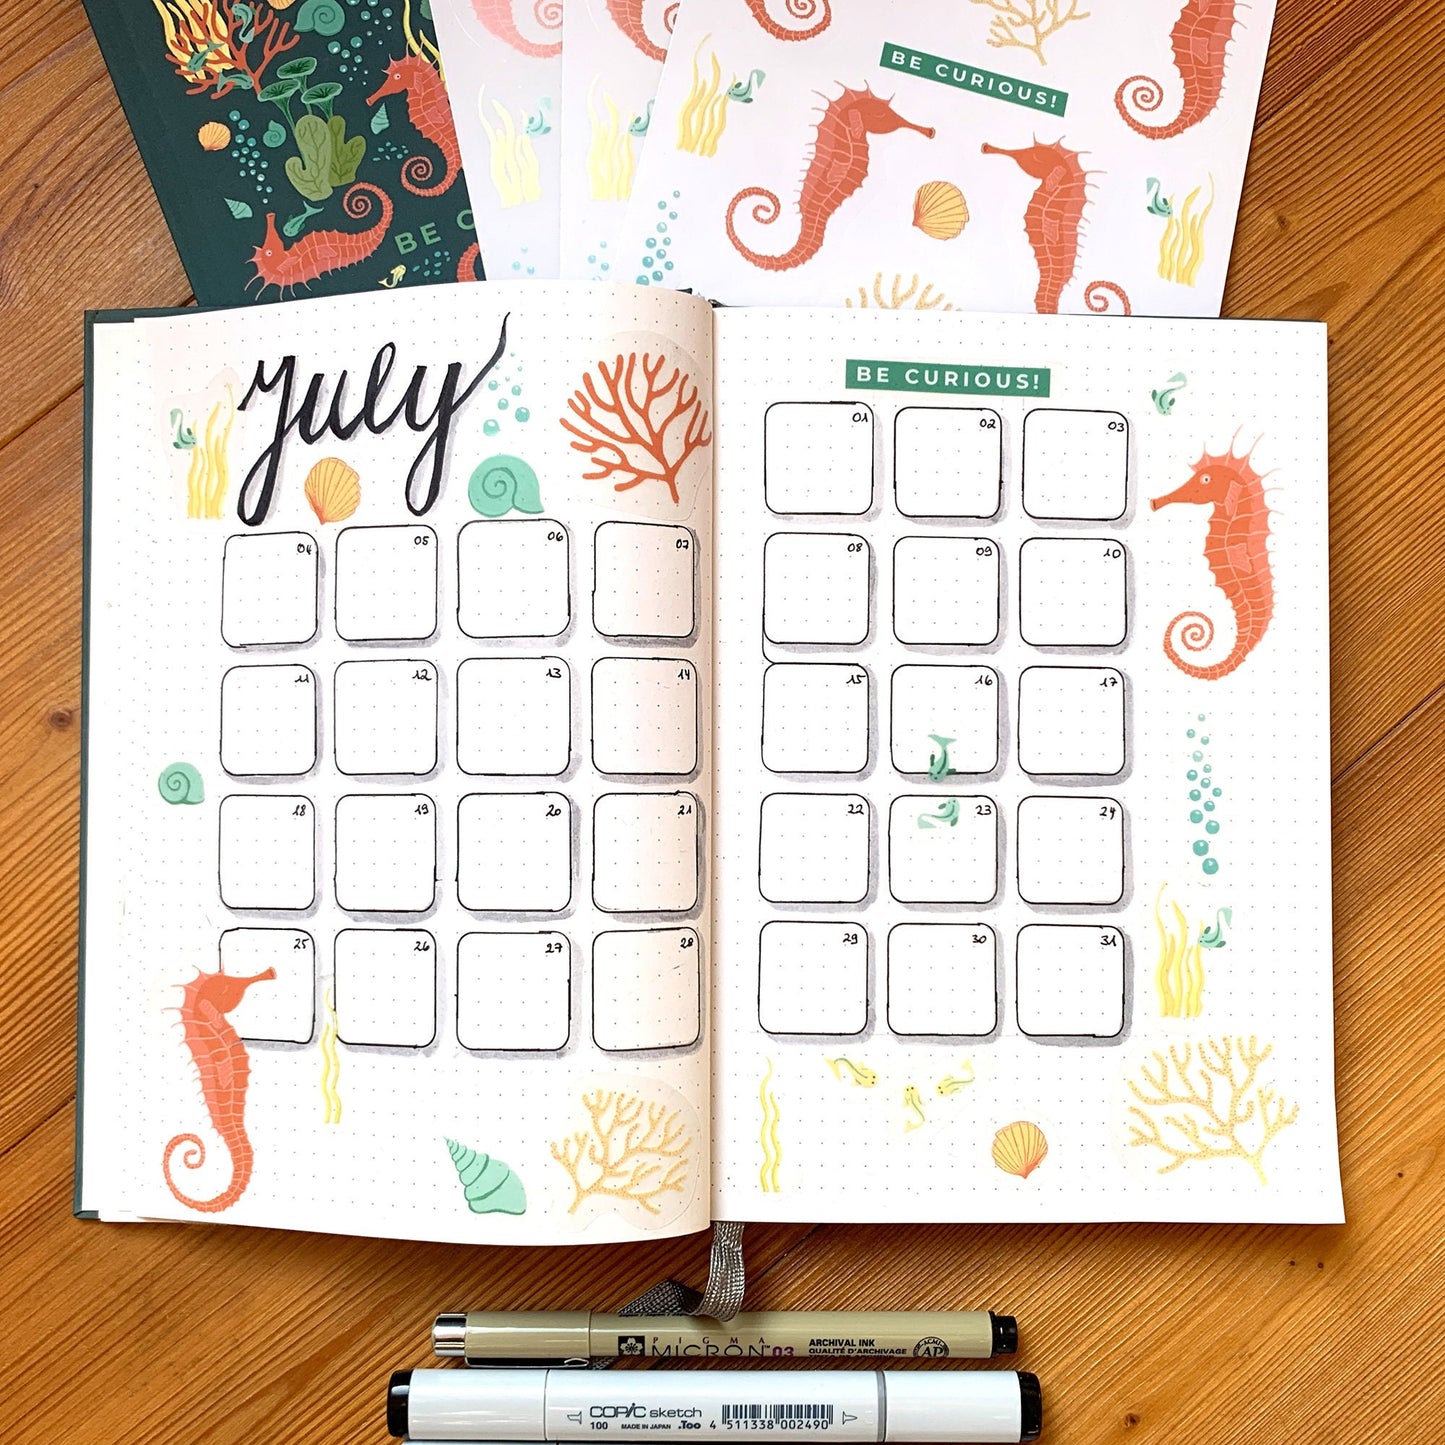 Sticker sheet 'Seahorse', shells and corals for journaling, decoration and more